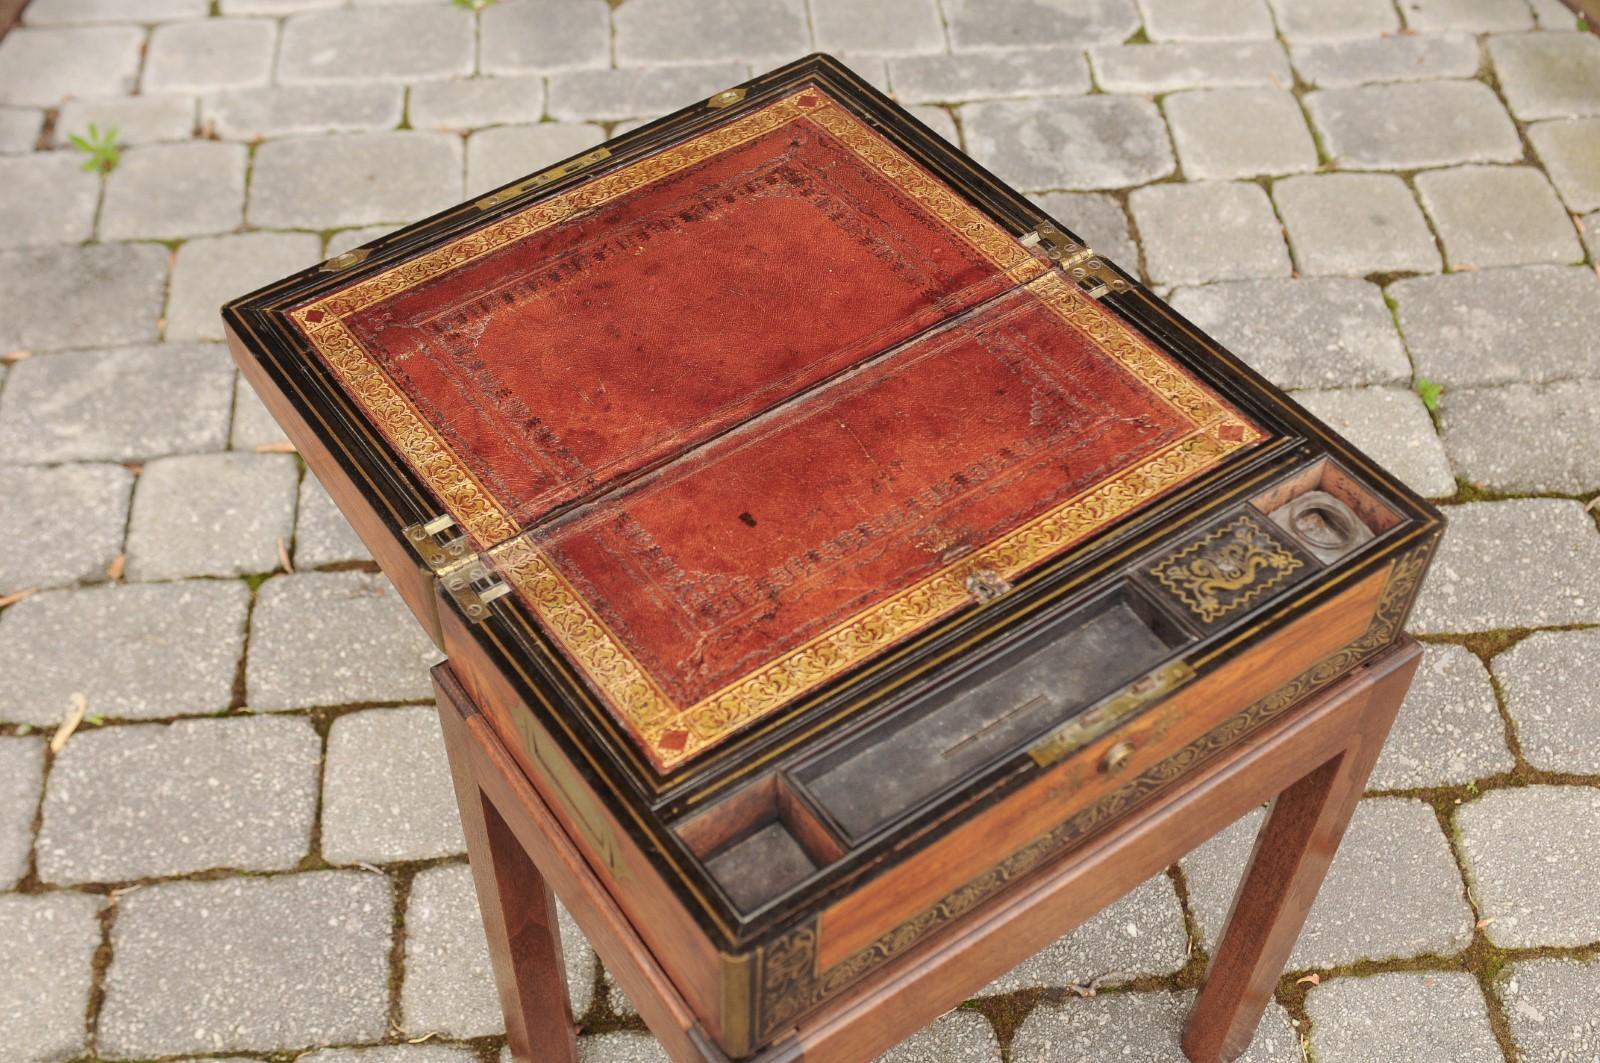 19th Century English Mahogany Lap Desk circa 1870 with Gilded Accents and Custom-Made Base